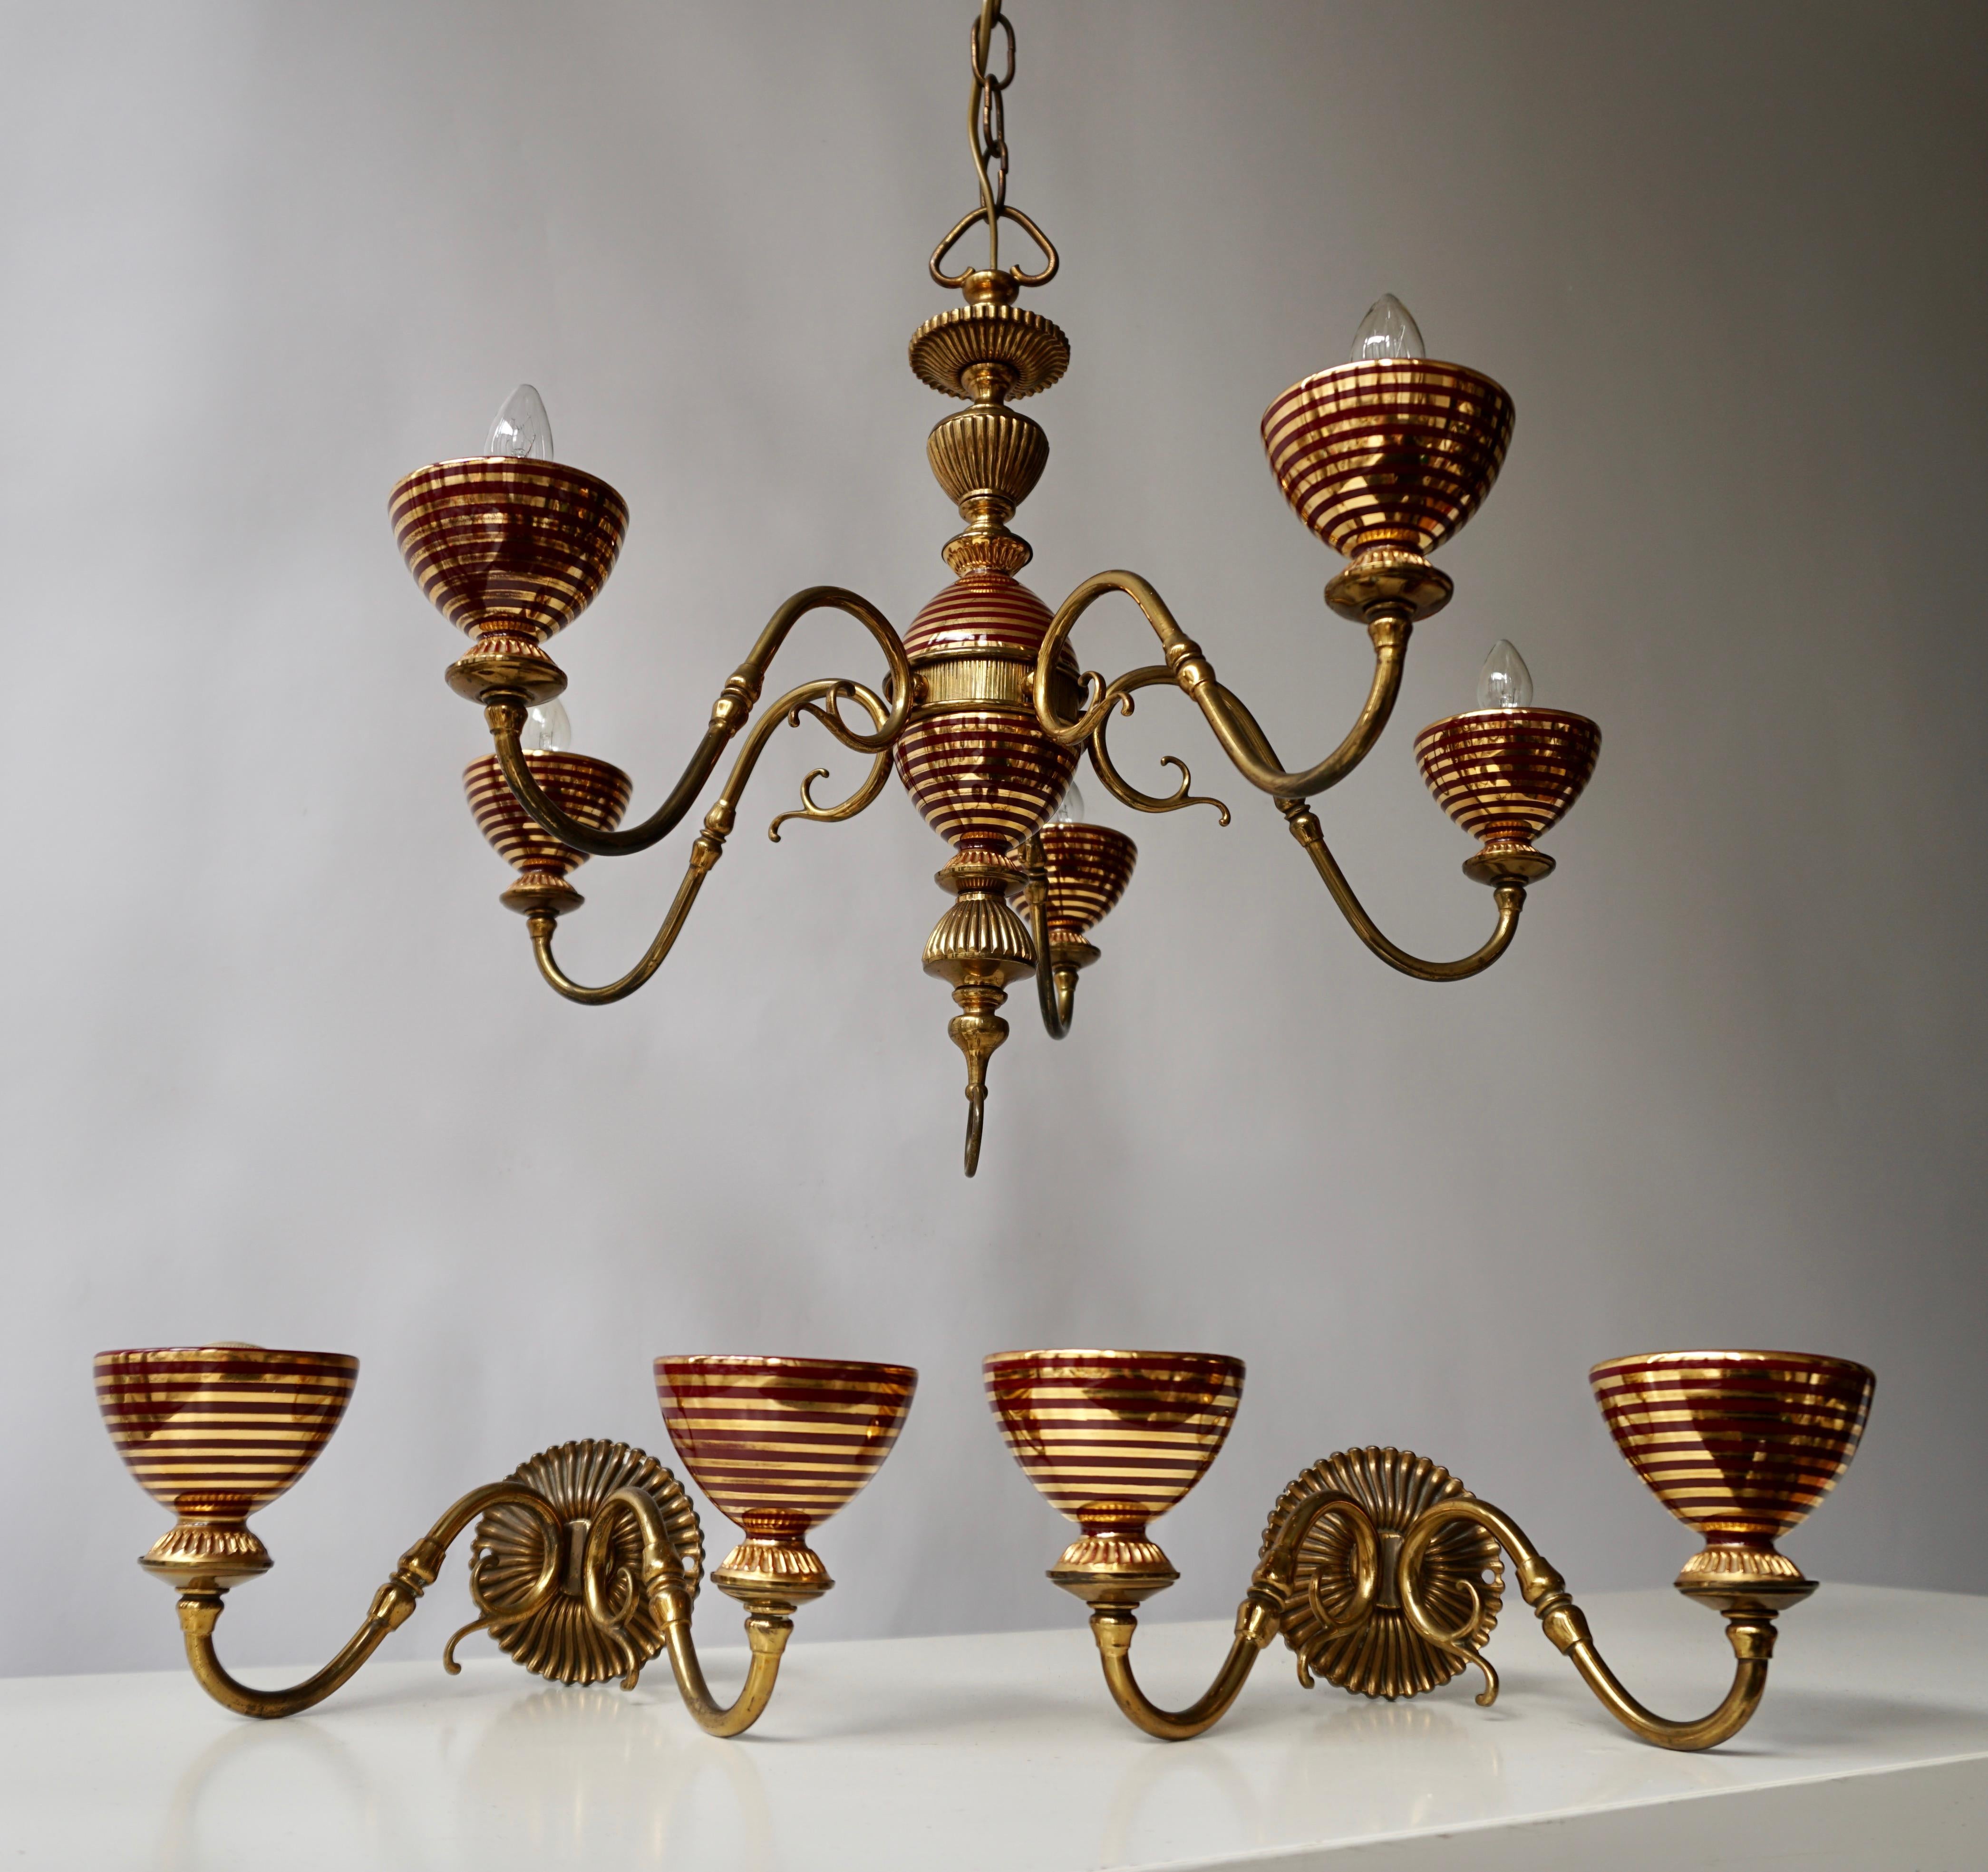 Italian Murano glass and brass chandelier with two wall lights.
Diameter chandelier 50 cm. Height fixture 40 cm. Total height including the chain and canopy 70 cm.
The chandelier requires five single E14 screw fit lightbulbs (60Watt max.)
Wall